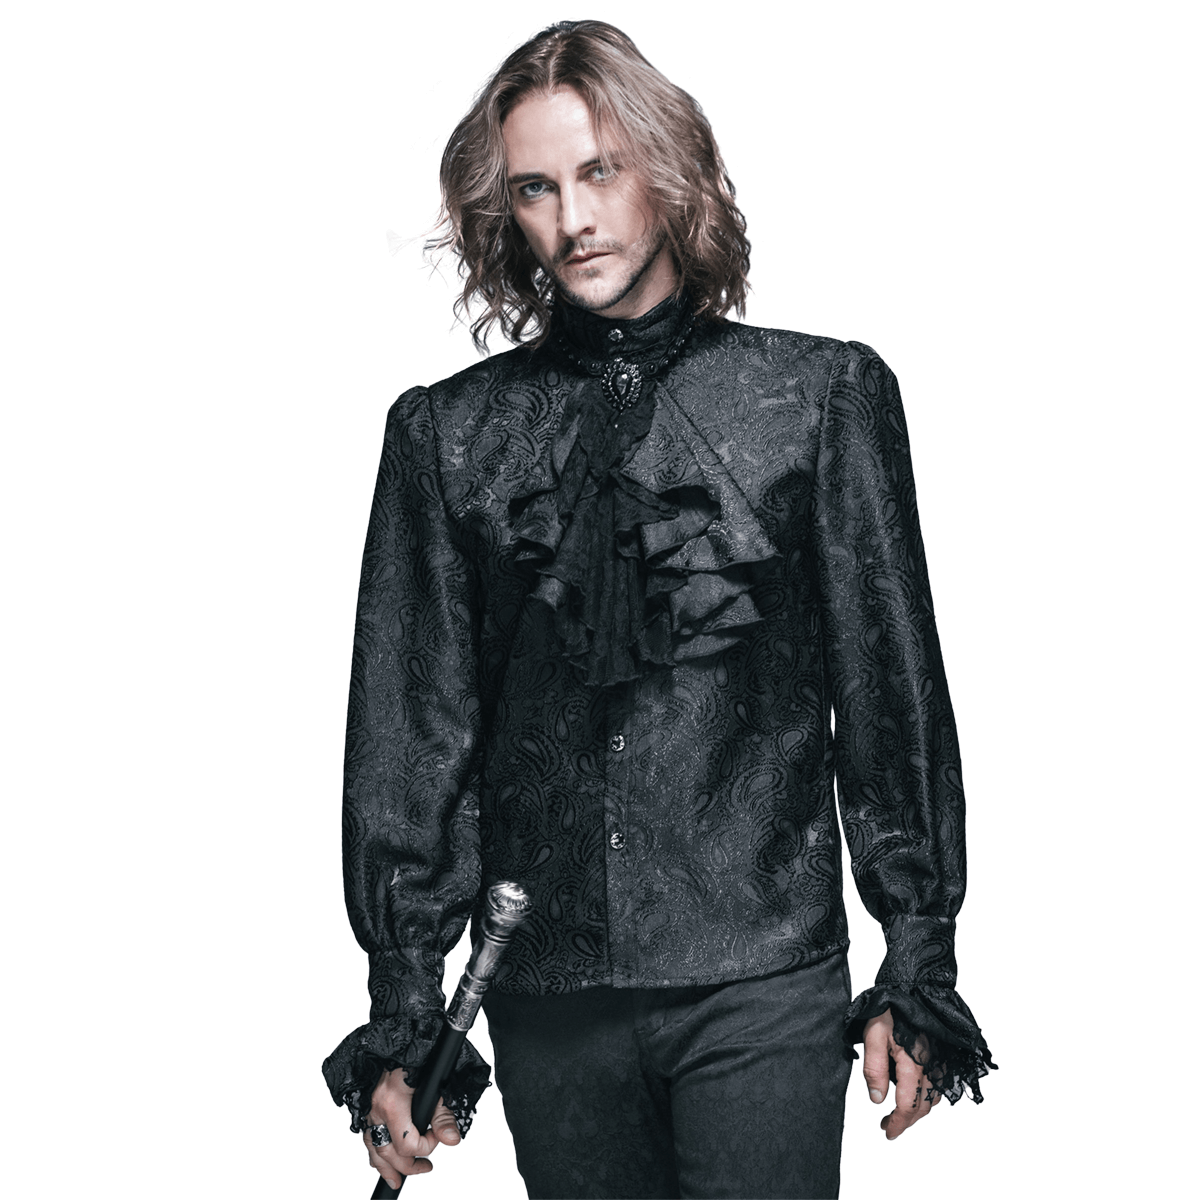 Gothic Black Men's Shirt With Tie Collar / Steampunk Male Long Sleeves Shirt - HARD'N'HEAVY